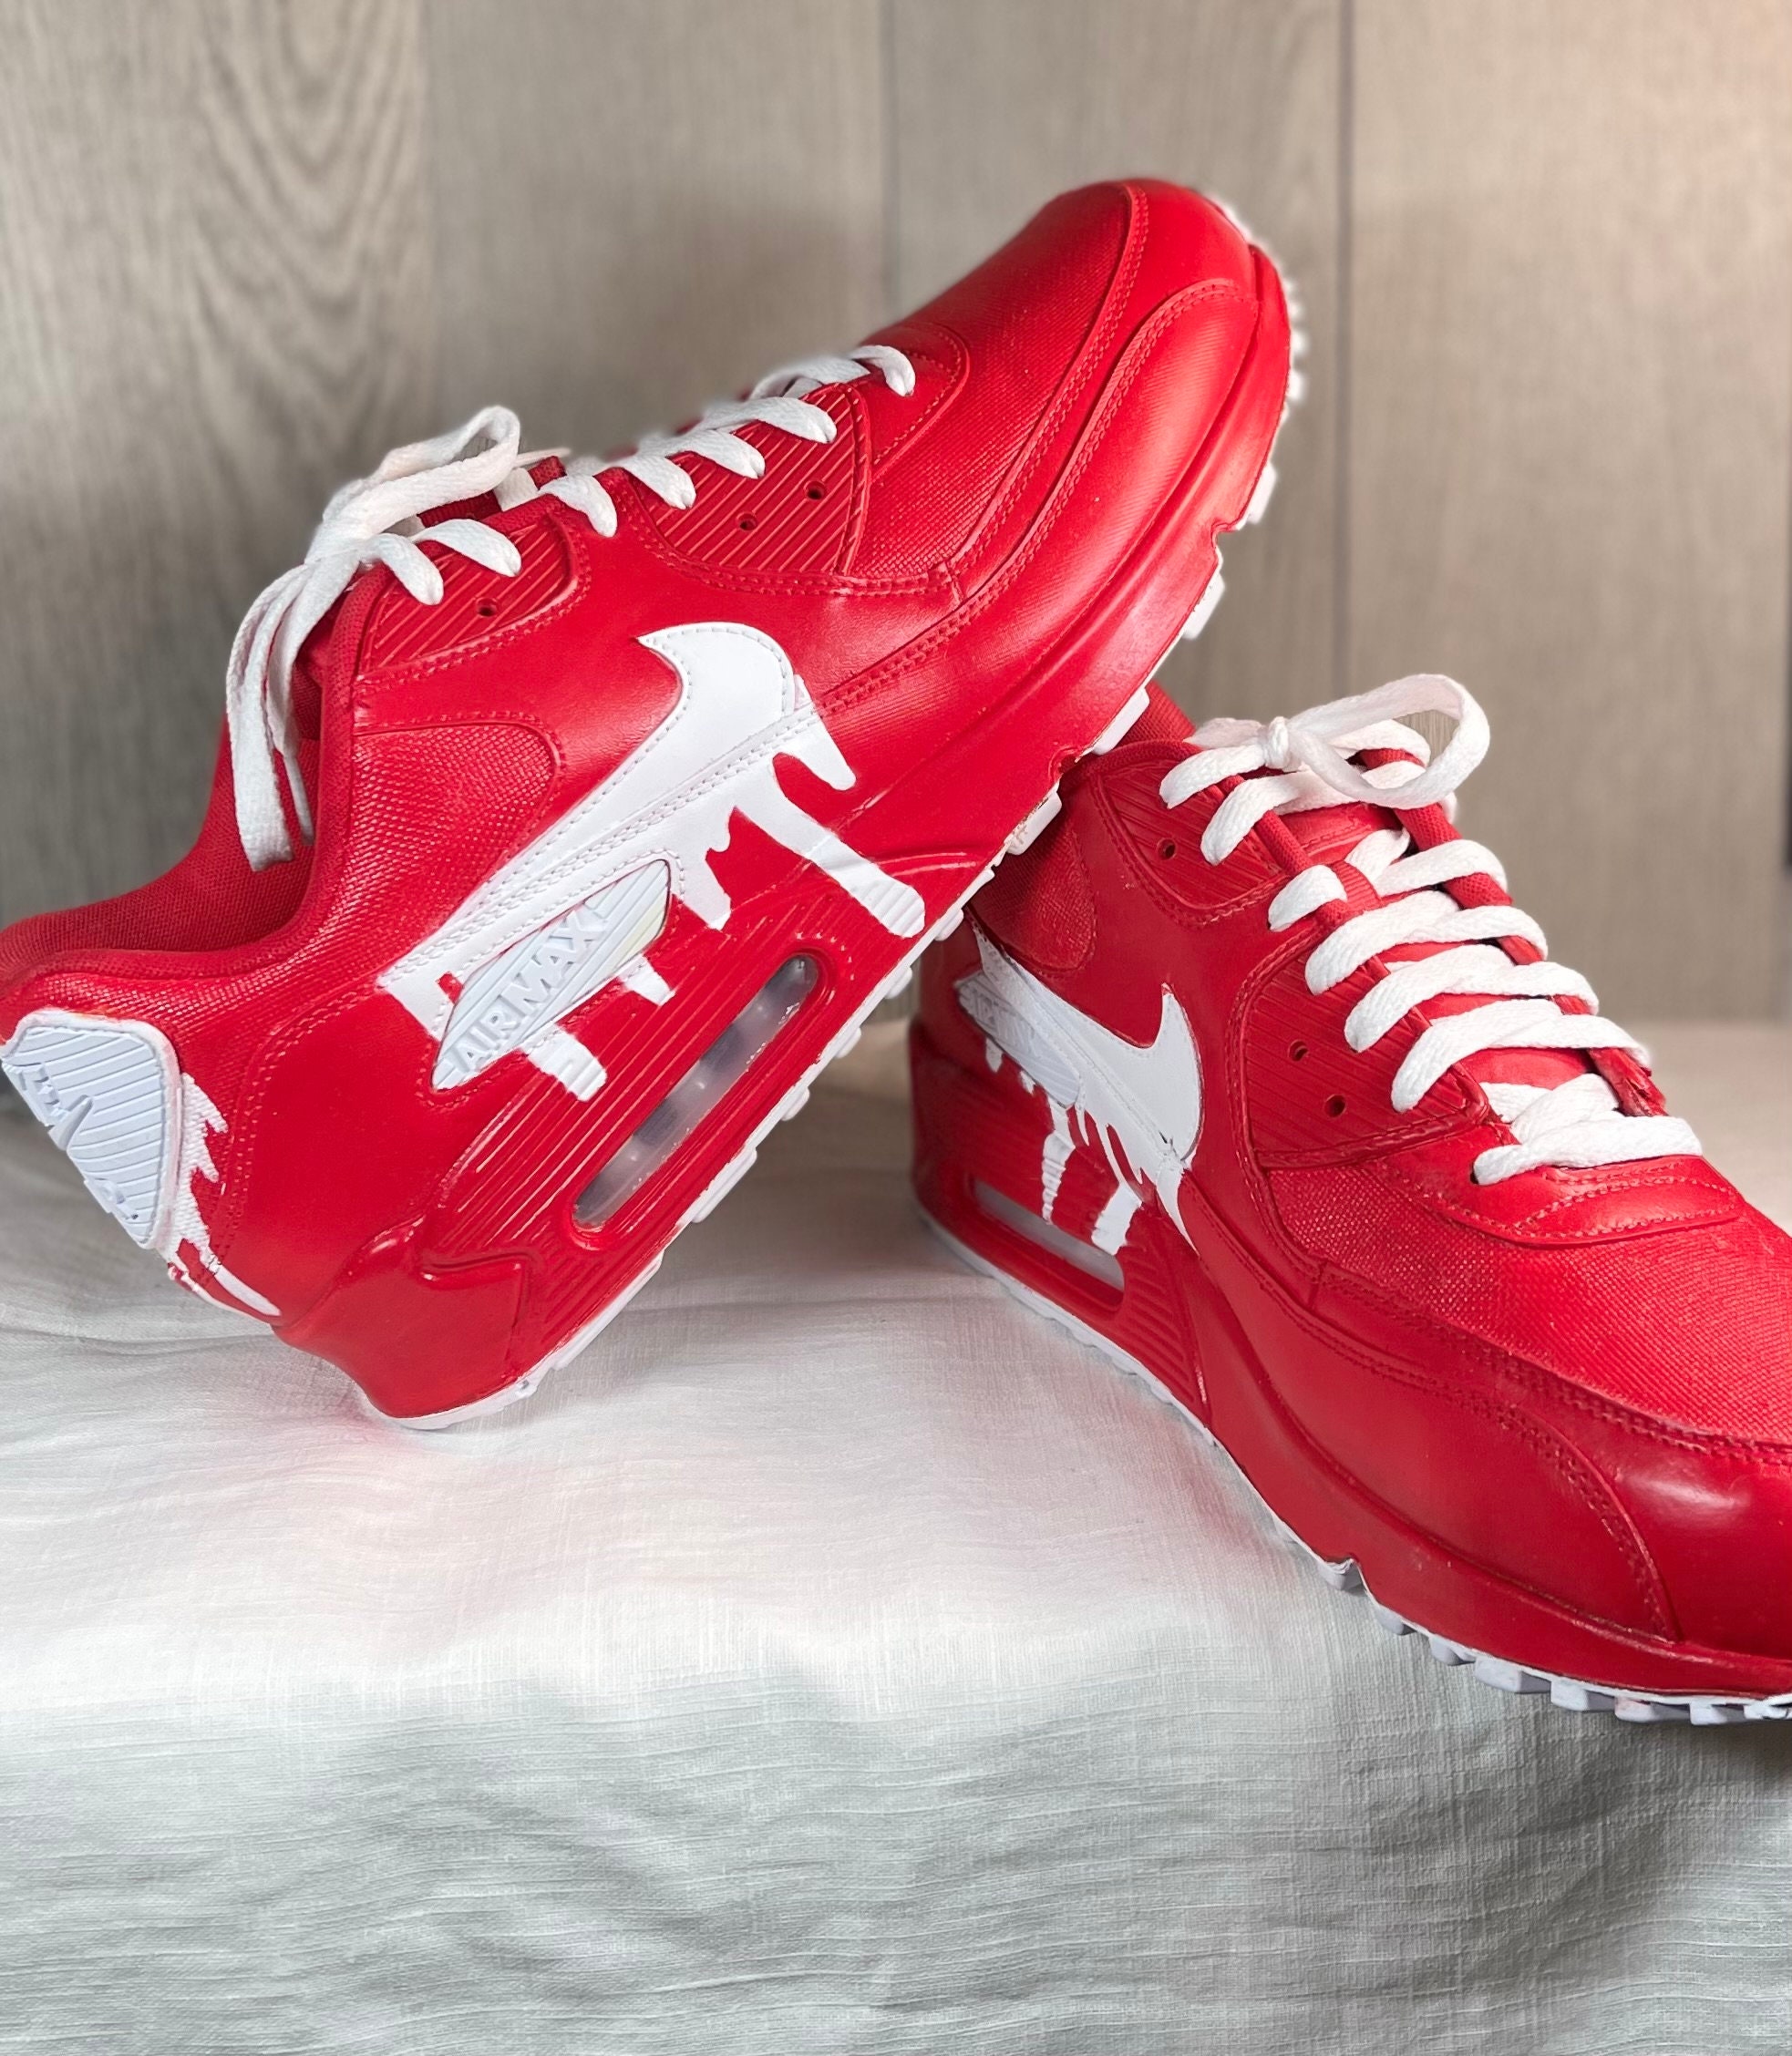 Custom Nike Air Max 90 Candy Red Drip + Time Lapse 